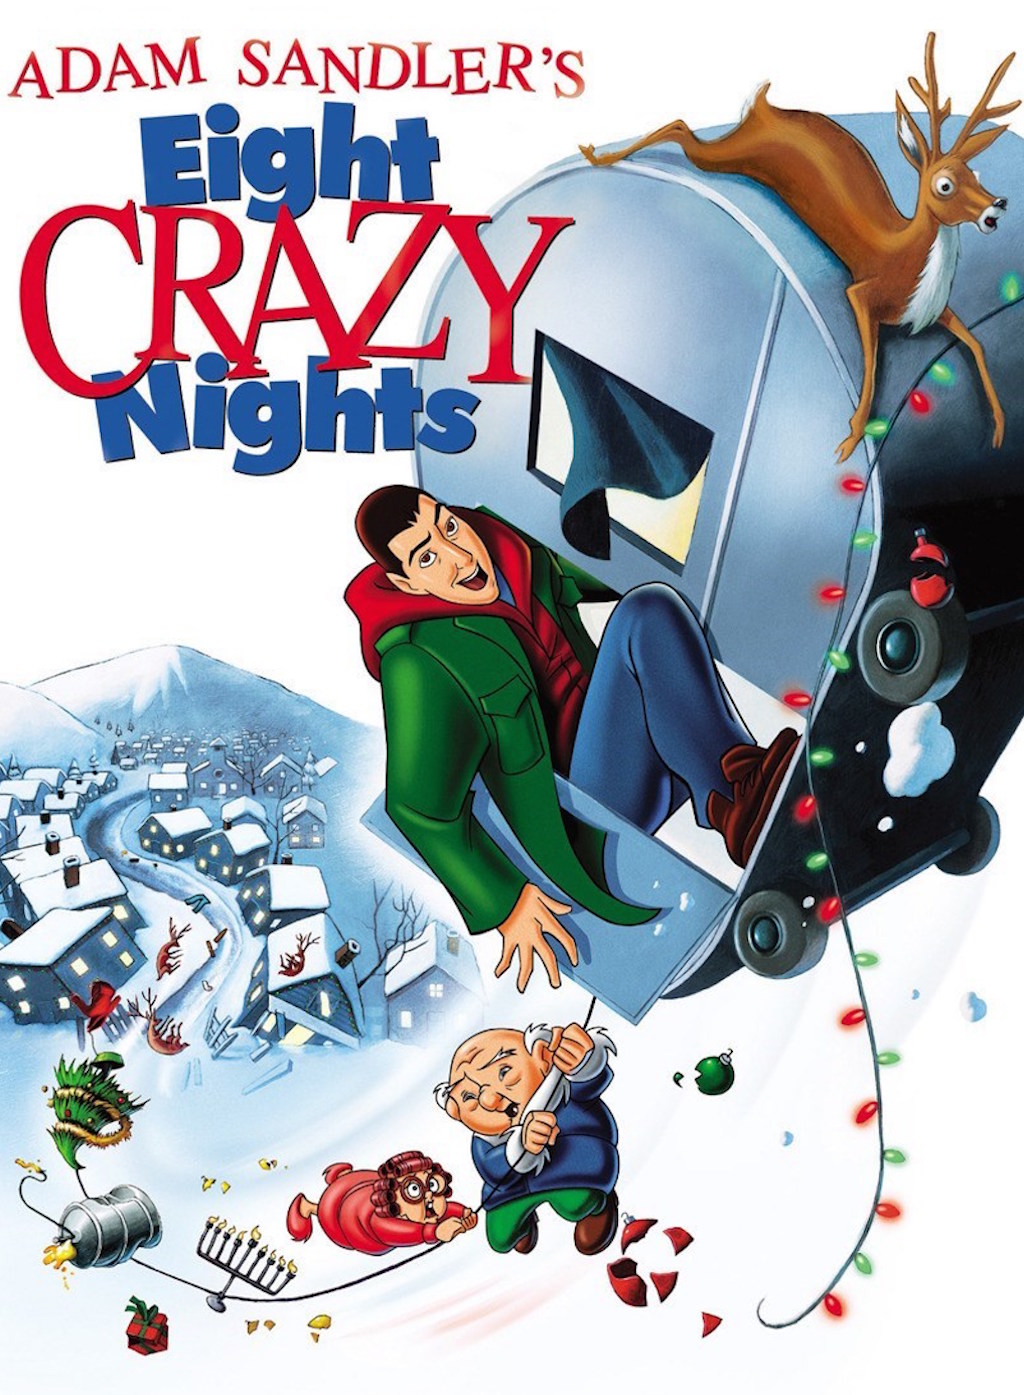 Eight Crazy Nights poster from Subscene. 